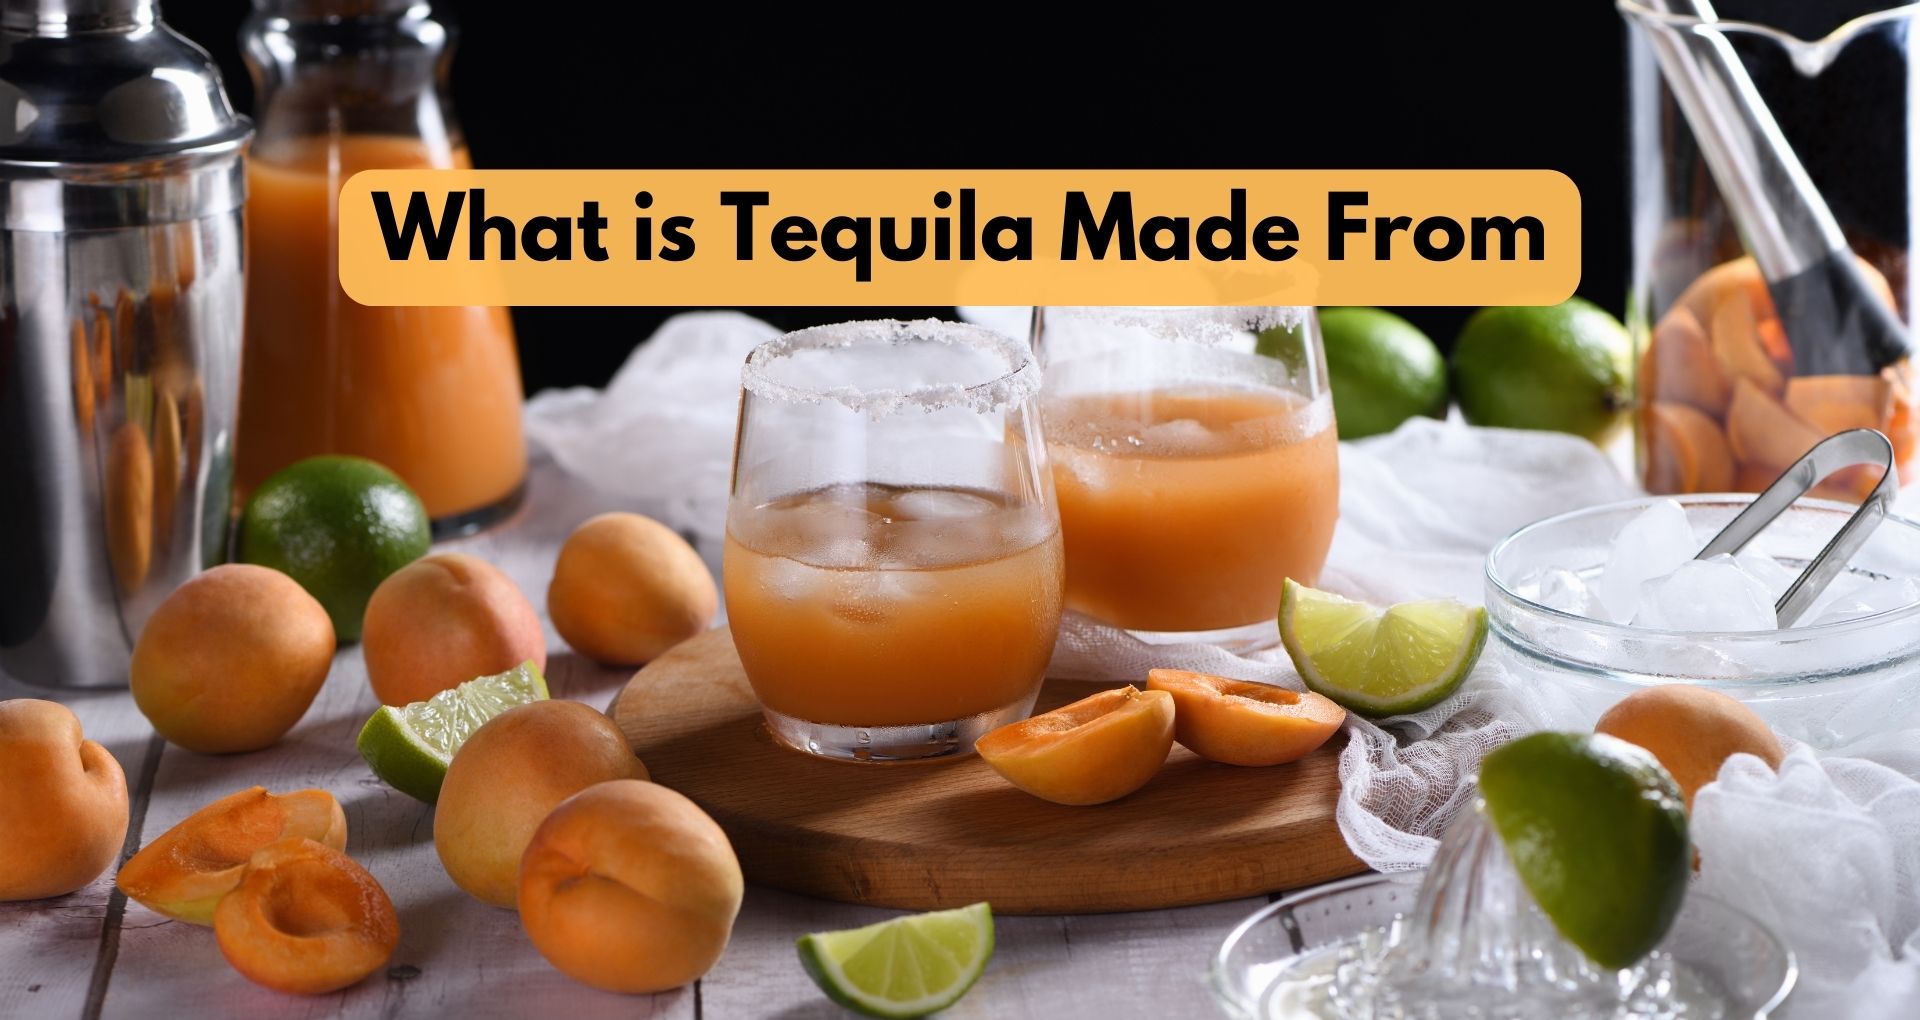 What is Tequila Made From?